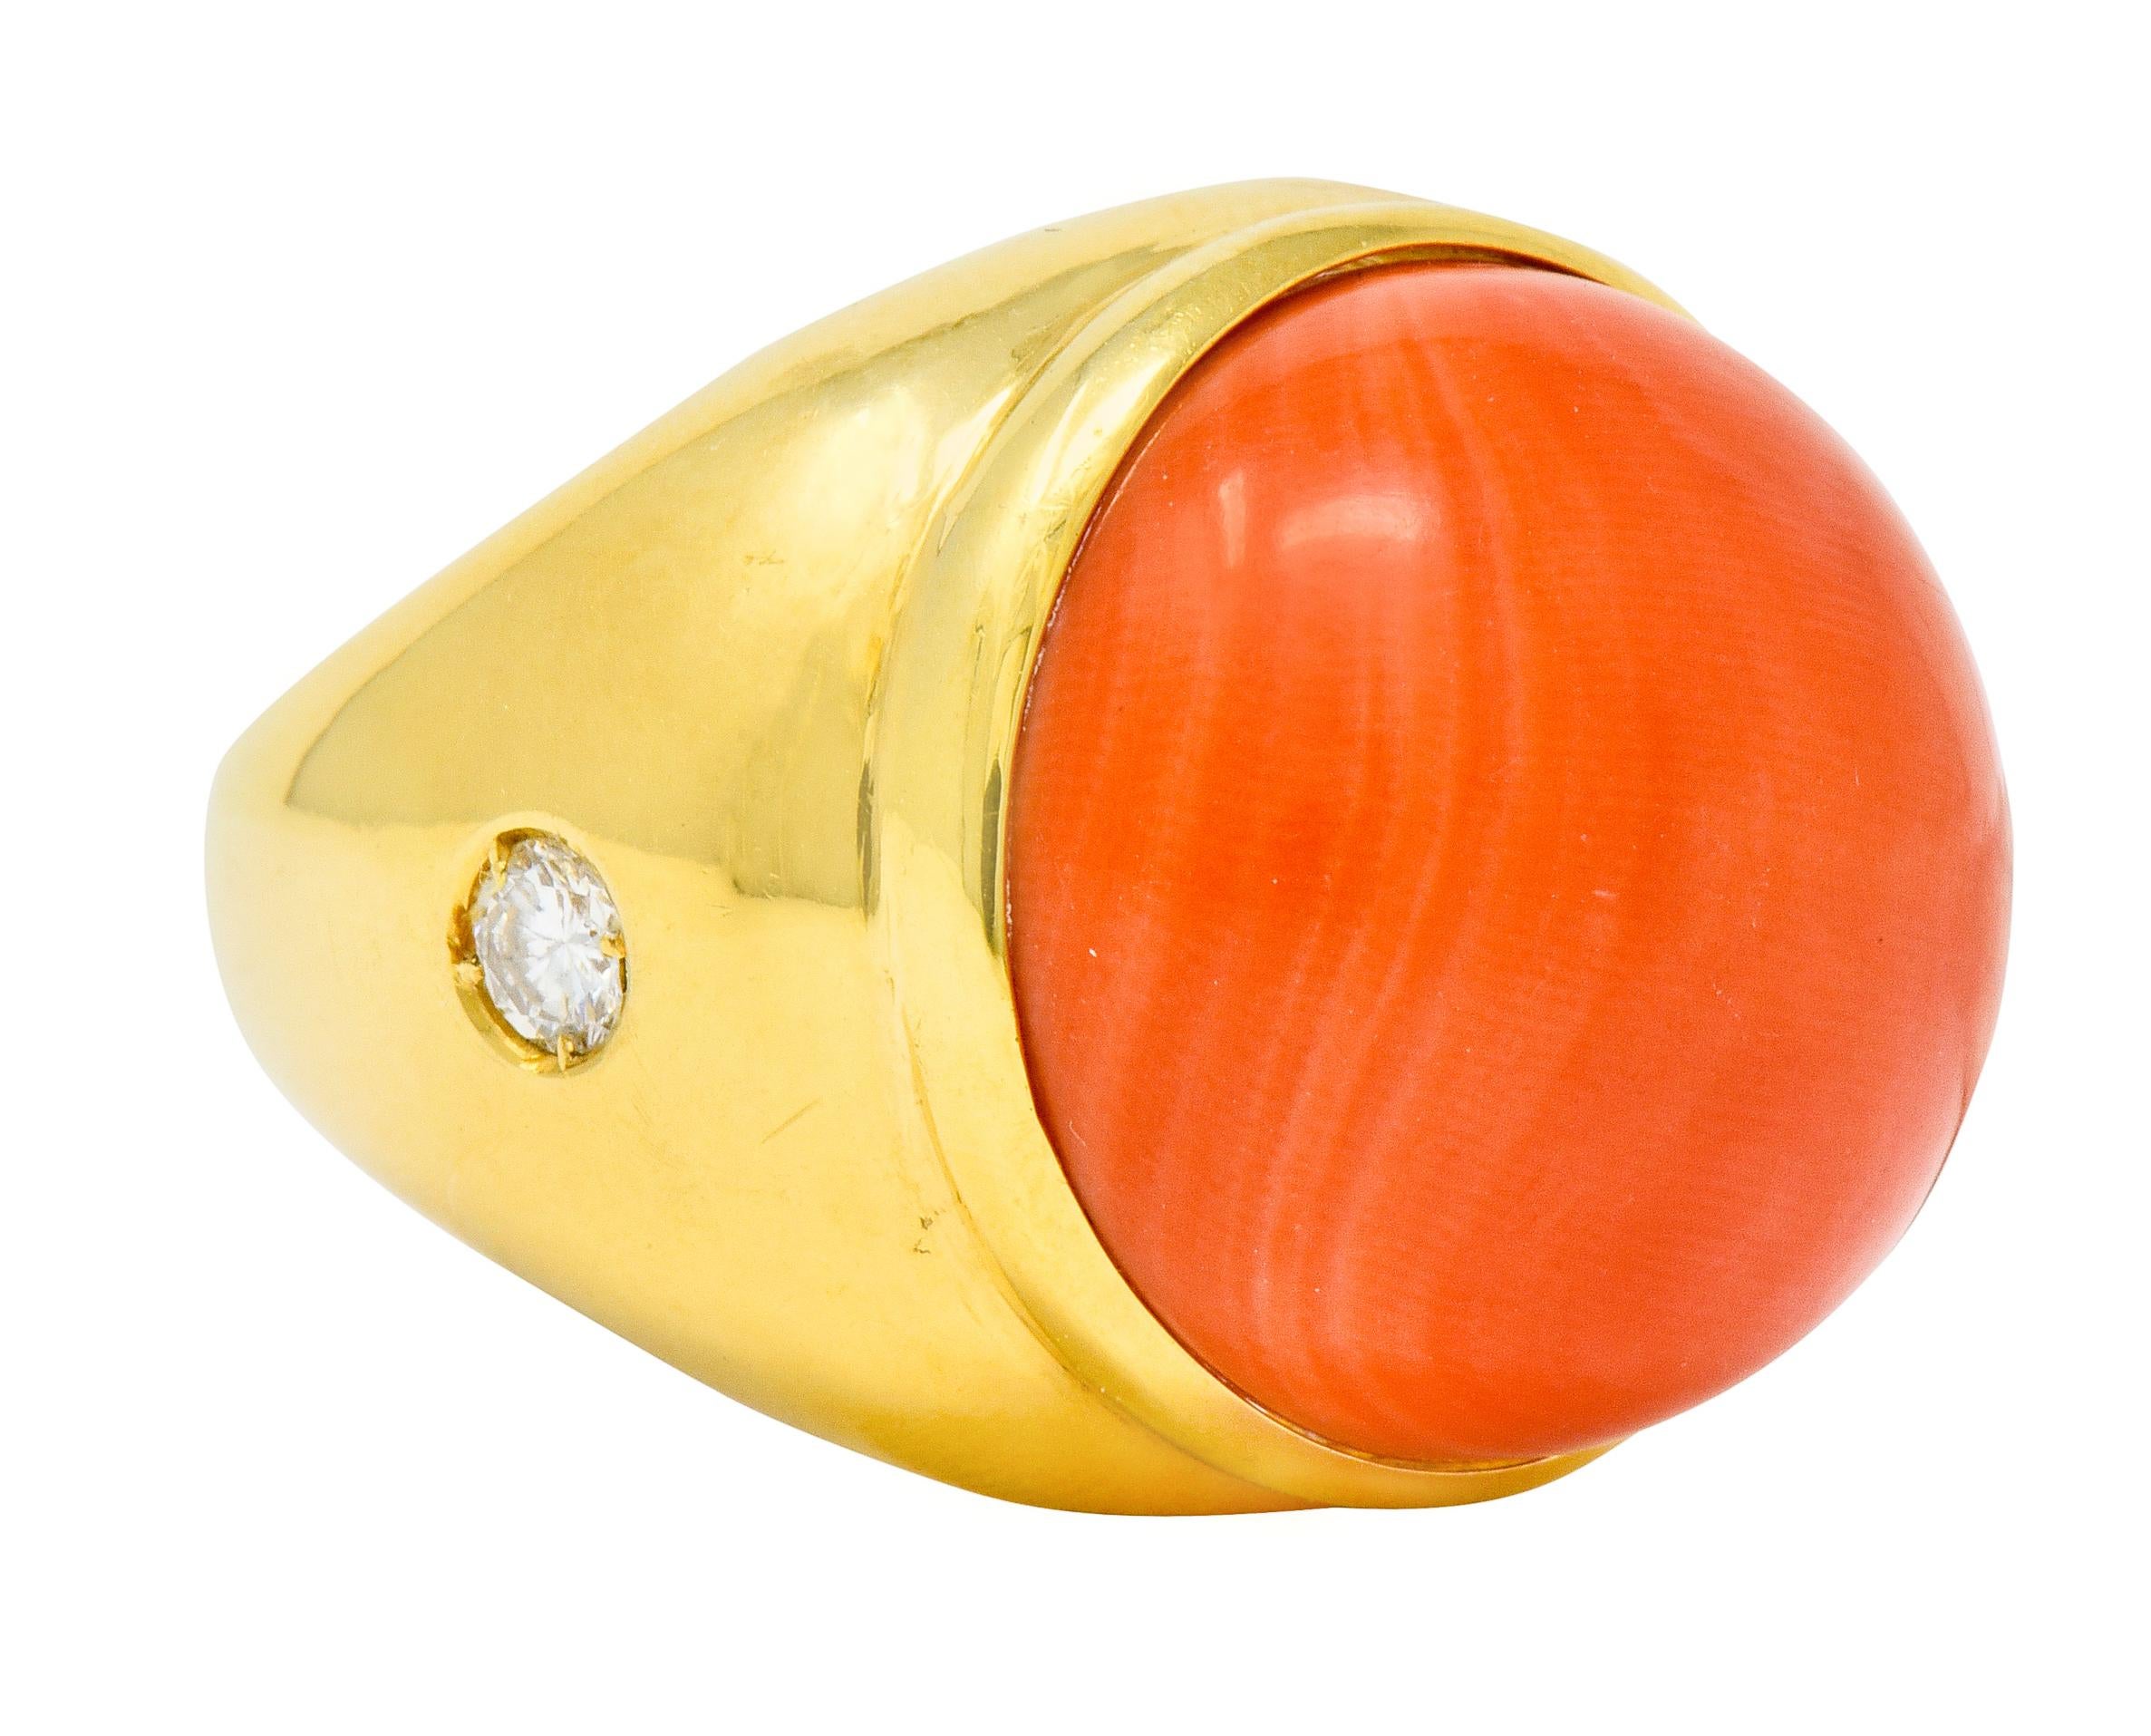 Centering a substantial 20.1 mm round coral cabochon, bezel set in a polished gold surround

Opaque and a robust orangey-red color with moderately swirled color distribution

Shoulders accented by flush set round brilliant cut diamonds weighing in